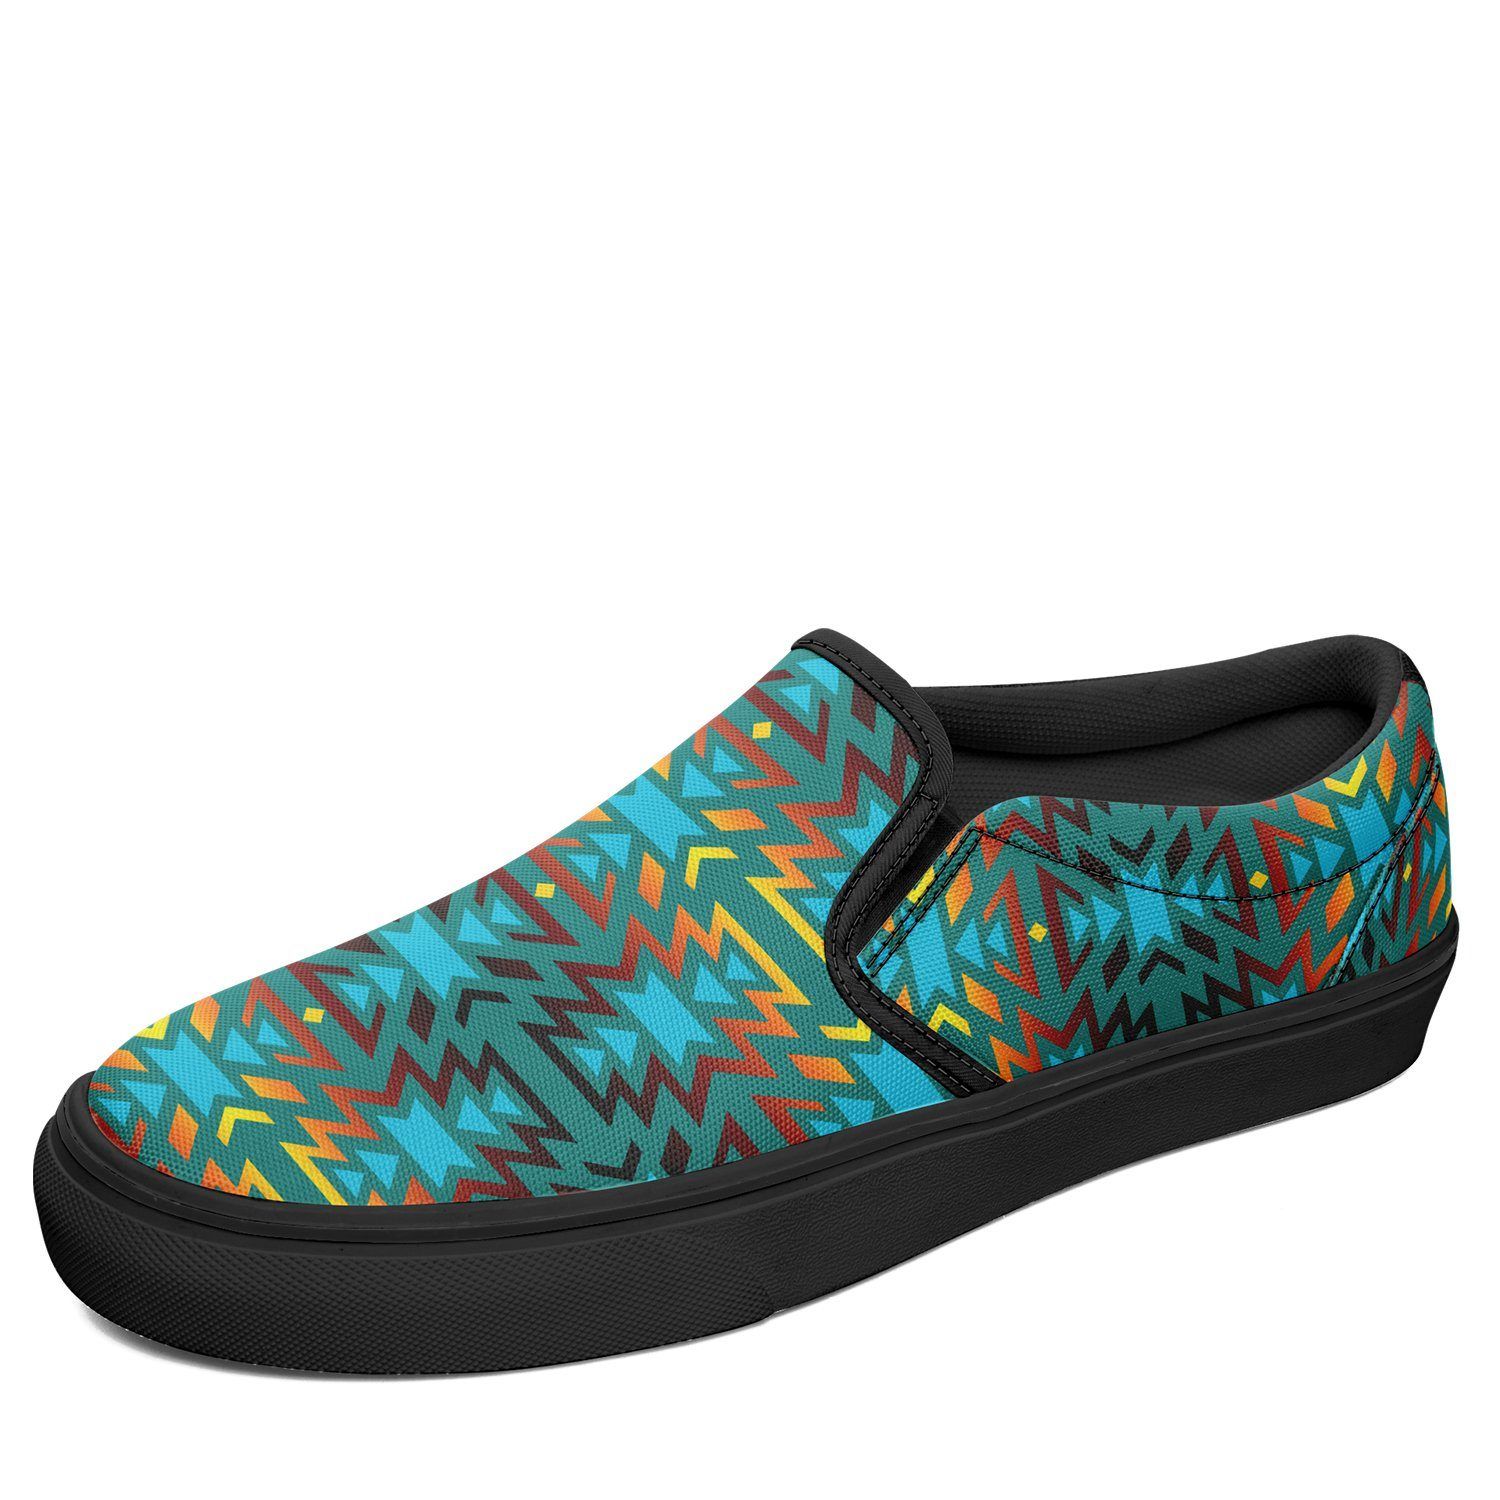 Fire Colors and Turquoise Teal Otoyimm Kid's Canvas Slip On Shoes 49 Dzine US Youth 1 / EUR 32 Black Sole 